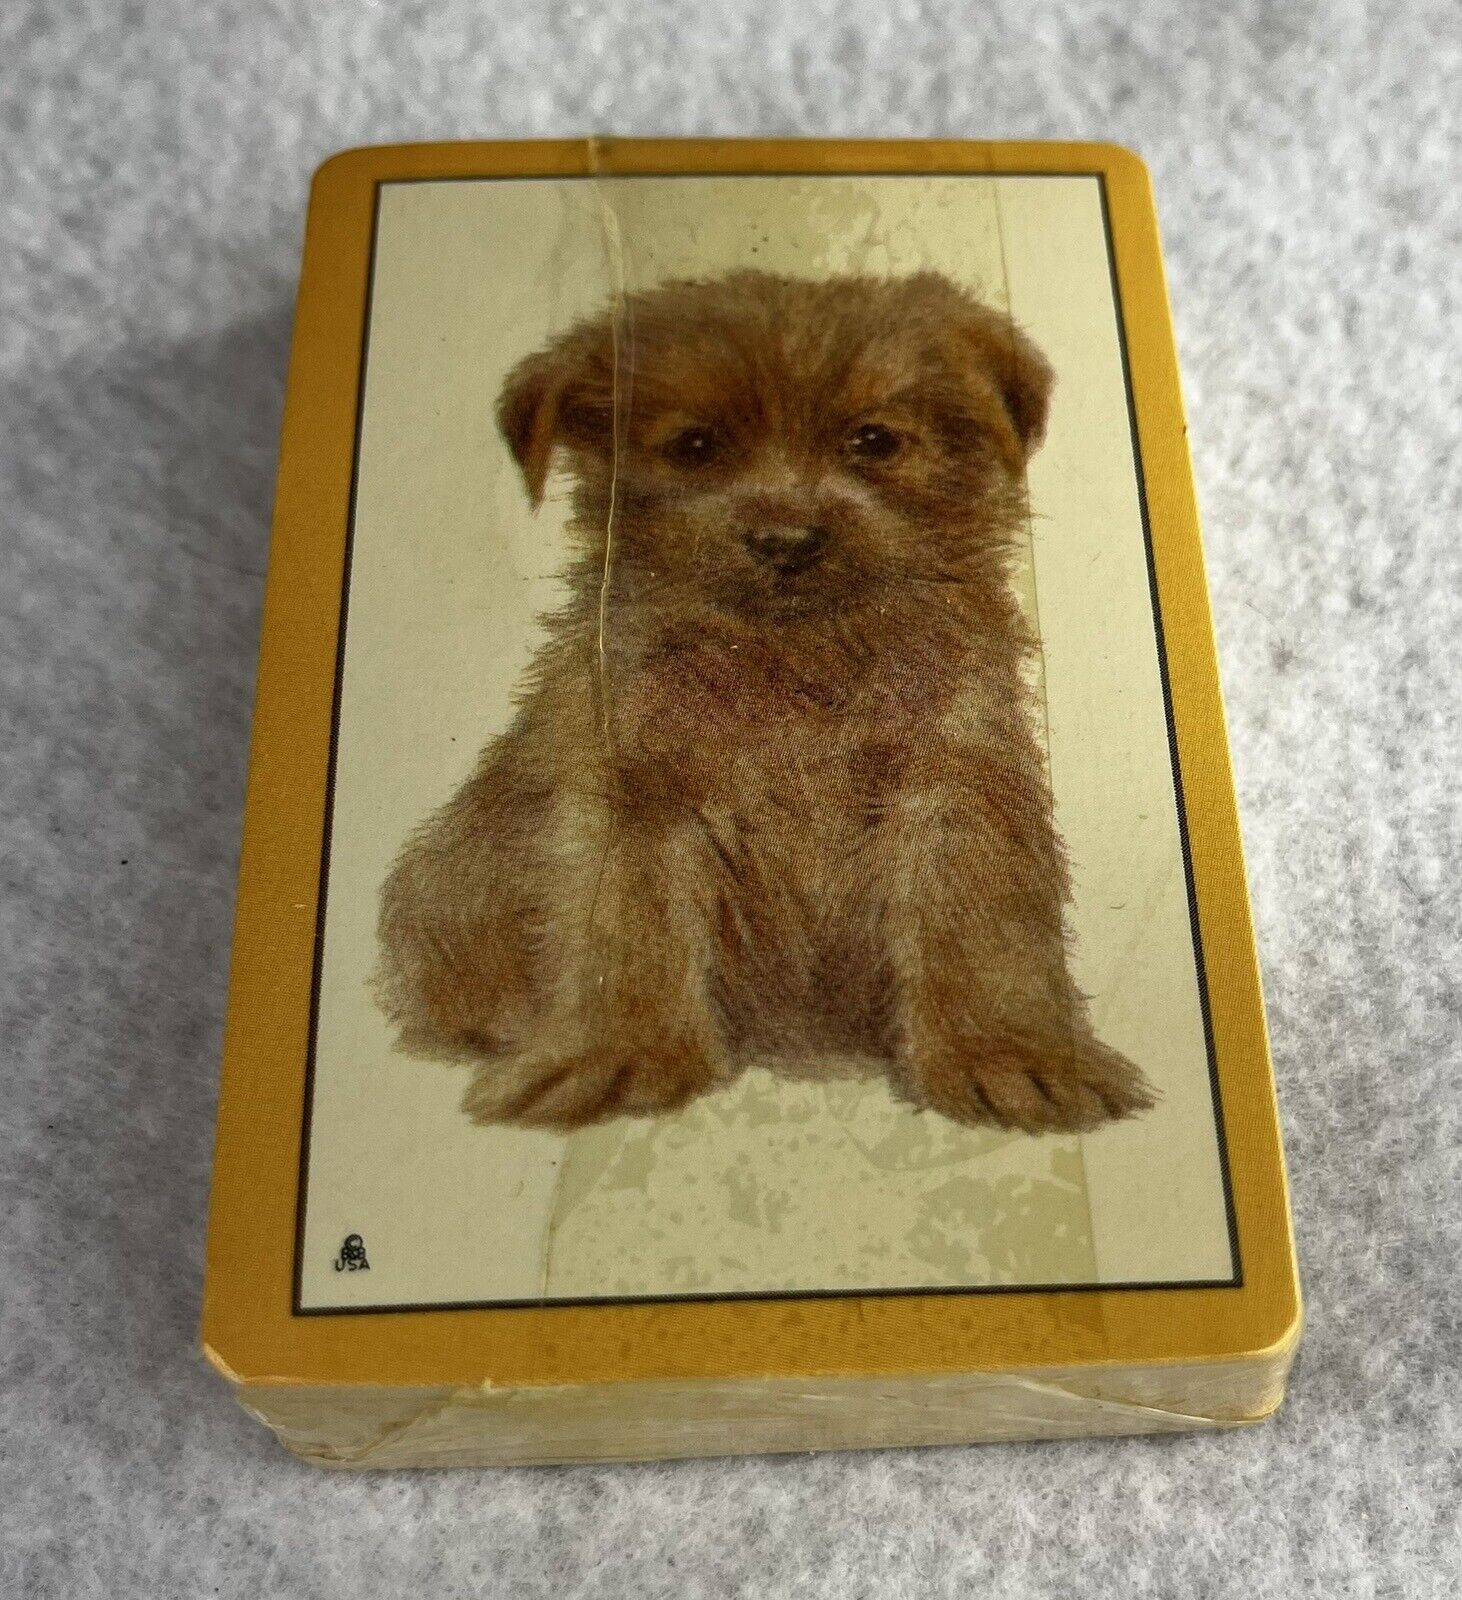 NOS Vintage Trump Playing Cards Sealed Package Made In USA Puppy Dog Animals